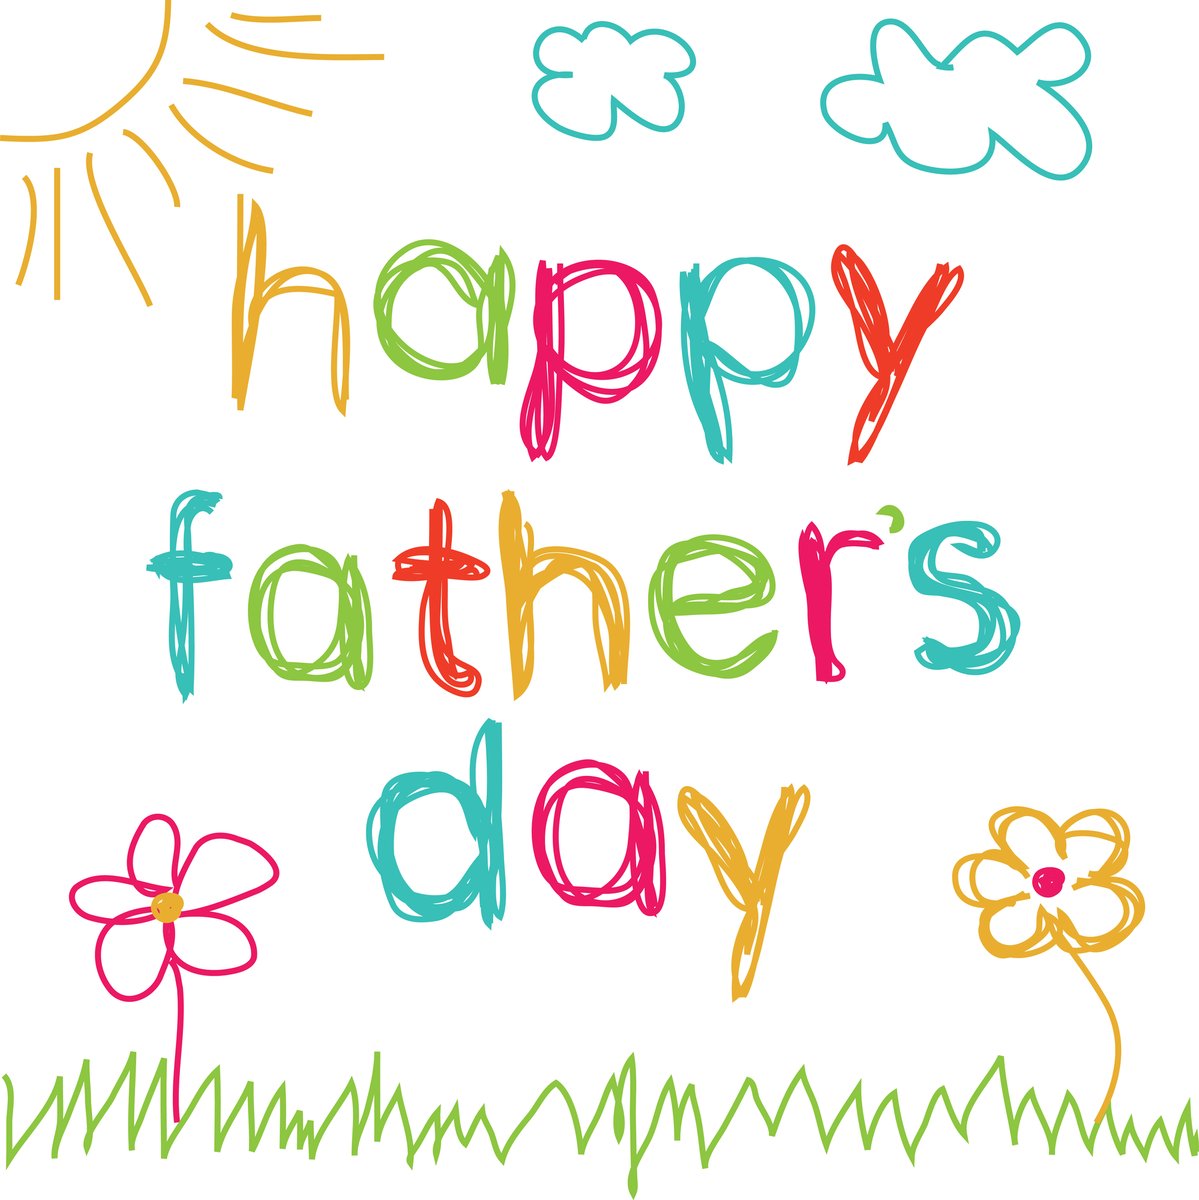 Happy Father's Day from Image Building Media!

#websitedesign #internetmarketing #FathersDay2023